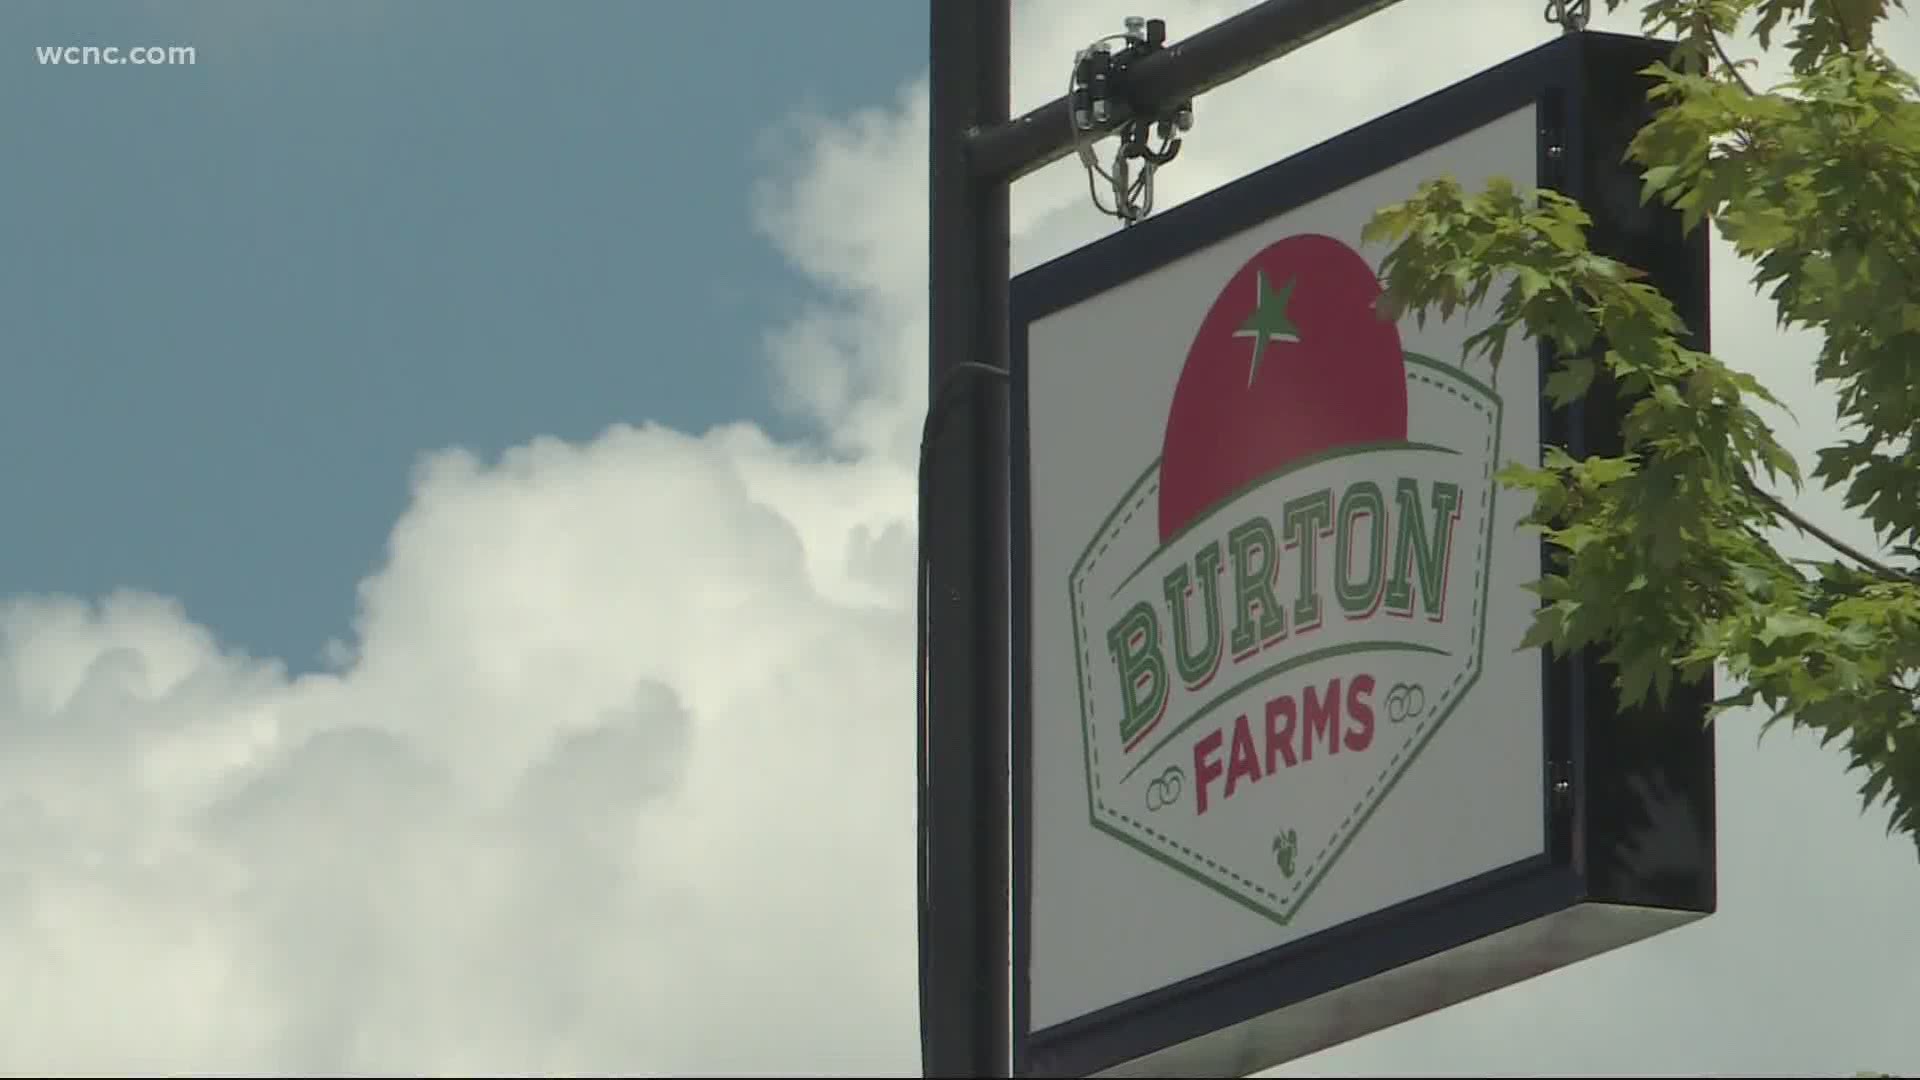 Reaction from the community after the owner of "burtons farms general store" was cited on a criminal summons